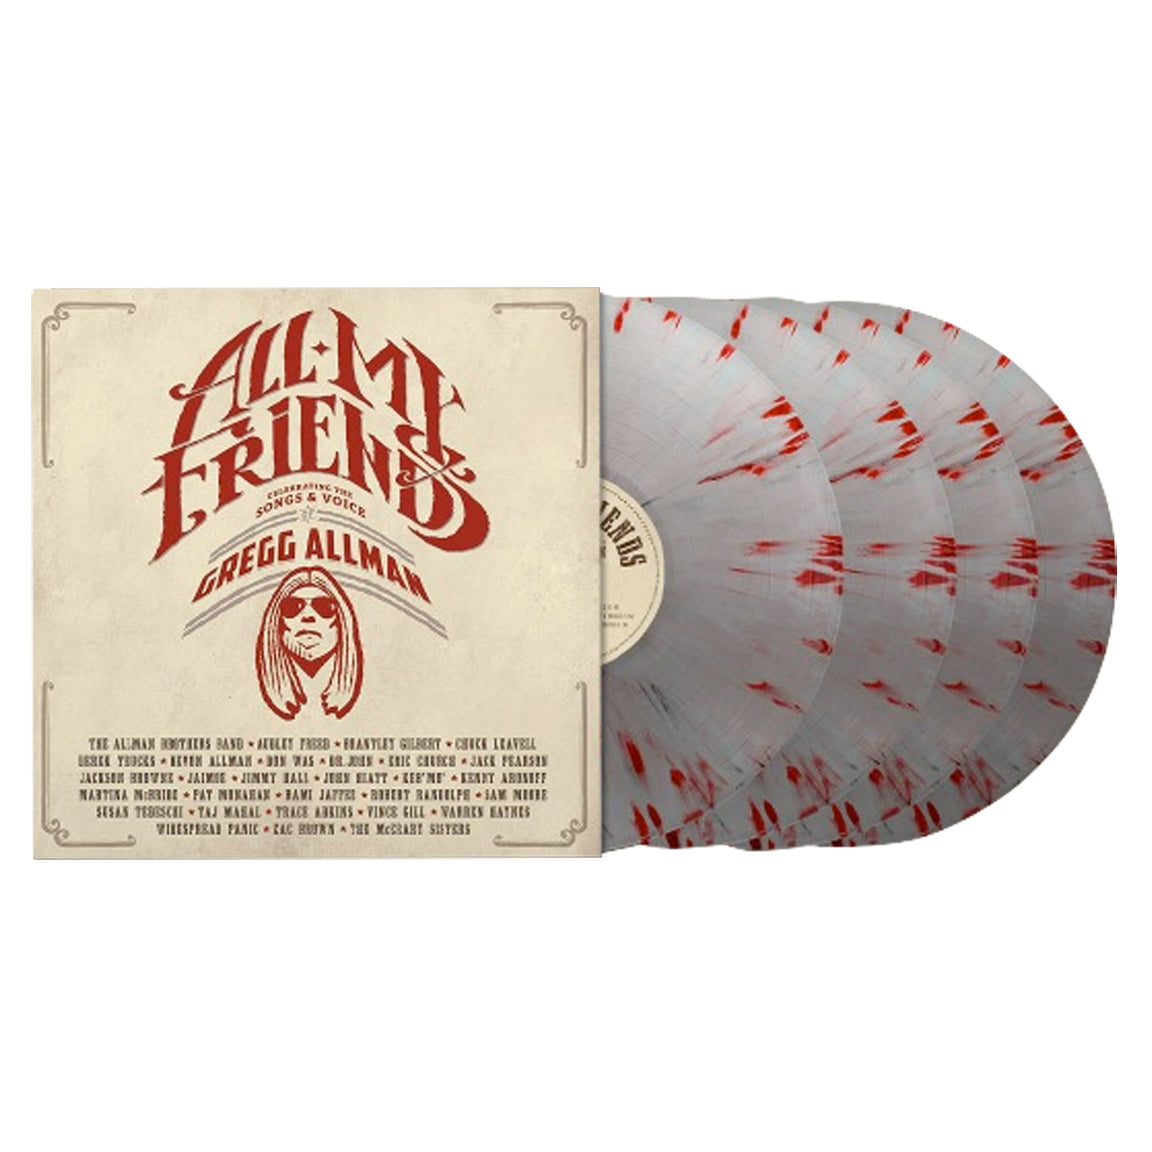 All My Friends: Celebrating The Songs & Voice Of Gregg Allman 4 LP Box Set - Iron and Blood